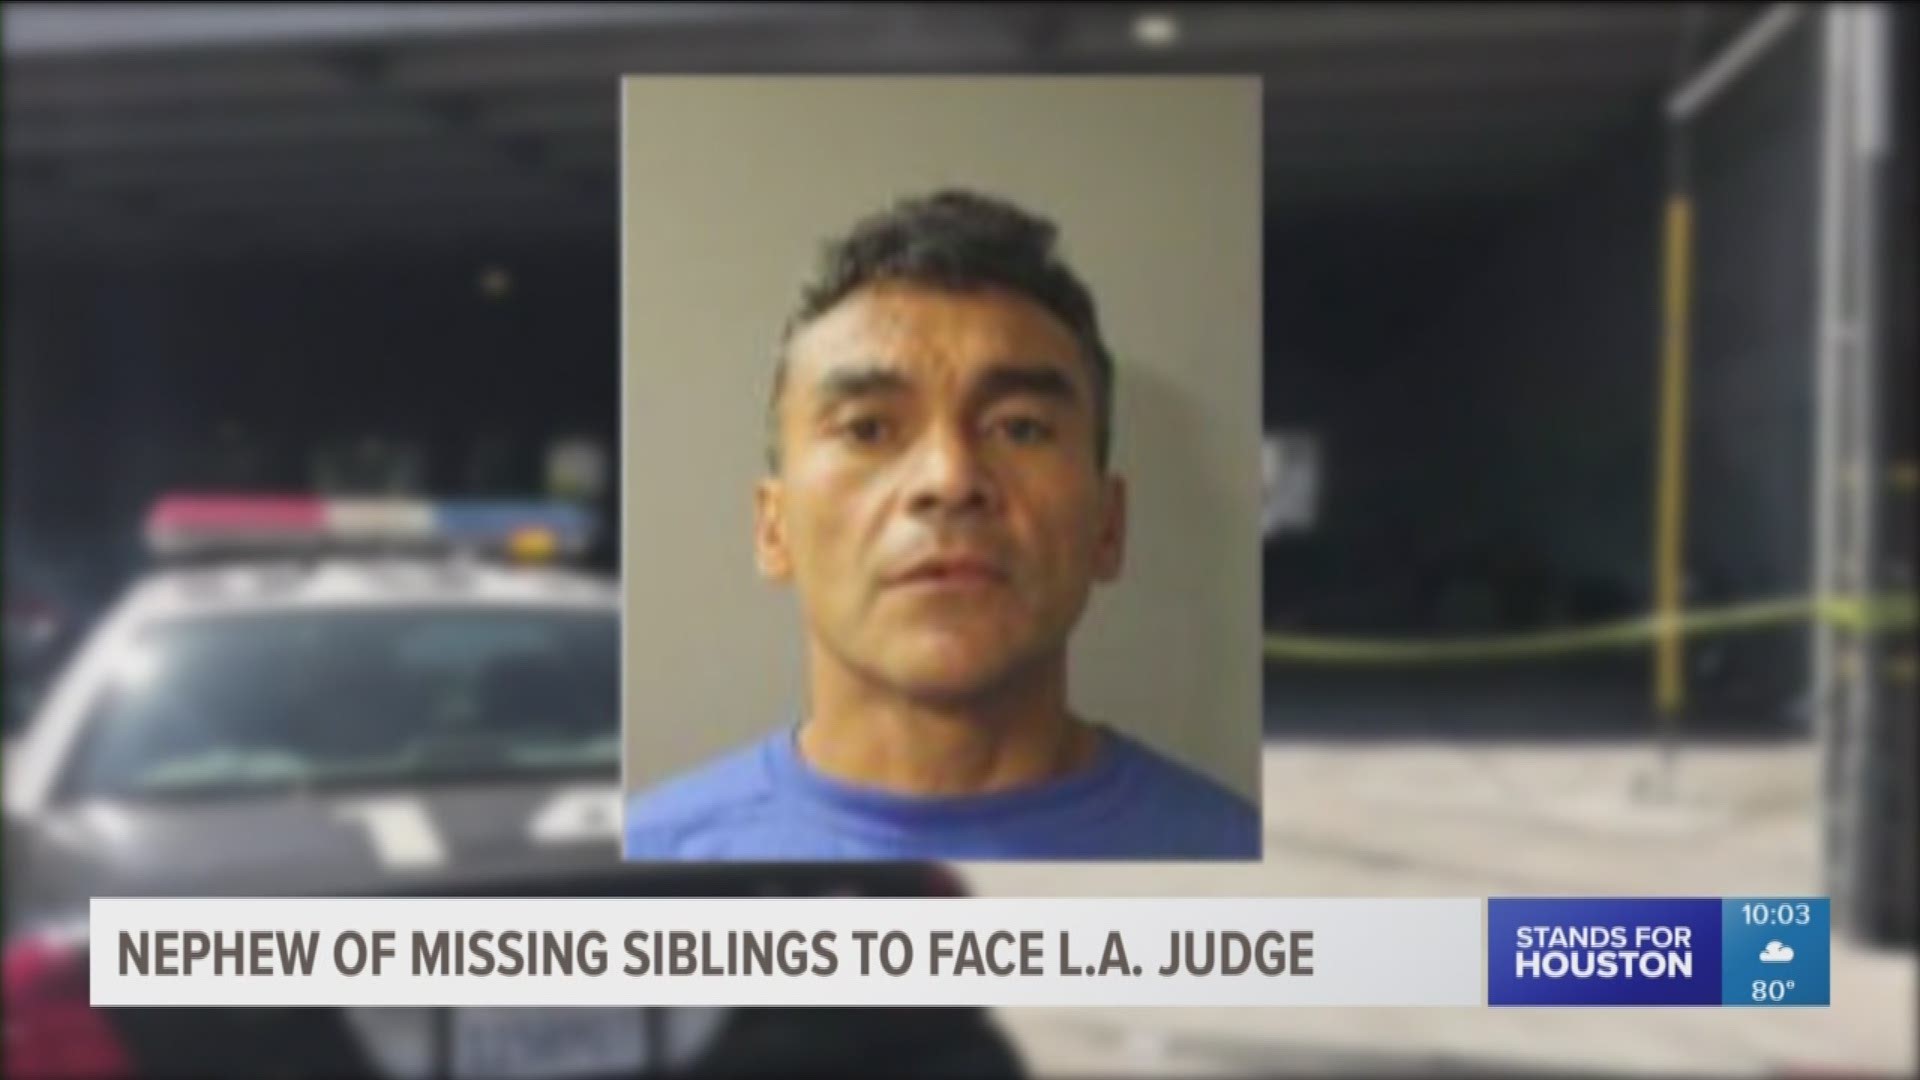 The nephew of siblings who went missing last month in Houston has been arrested after a string of violent attacks in California and identified as a person of interested in his aunt and uncle's case.